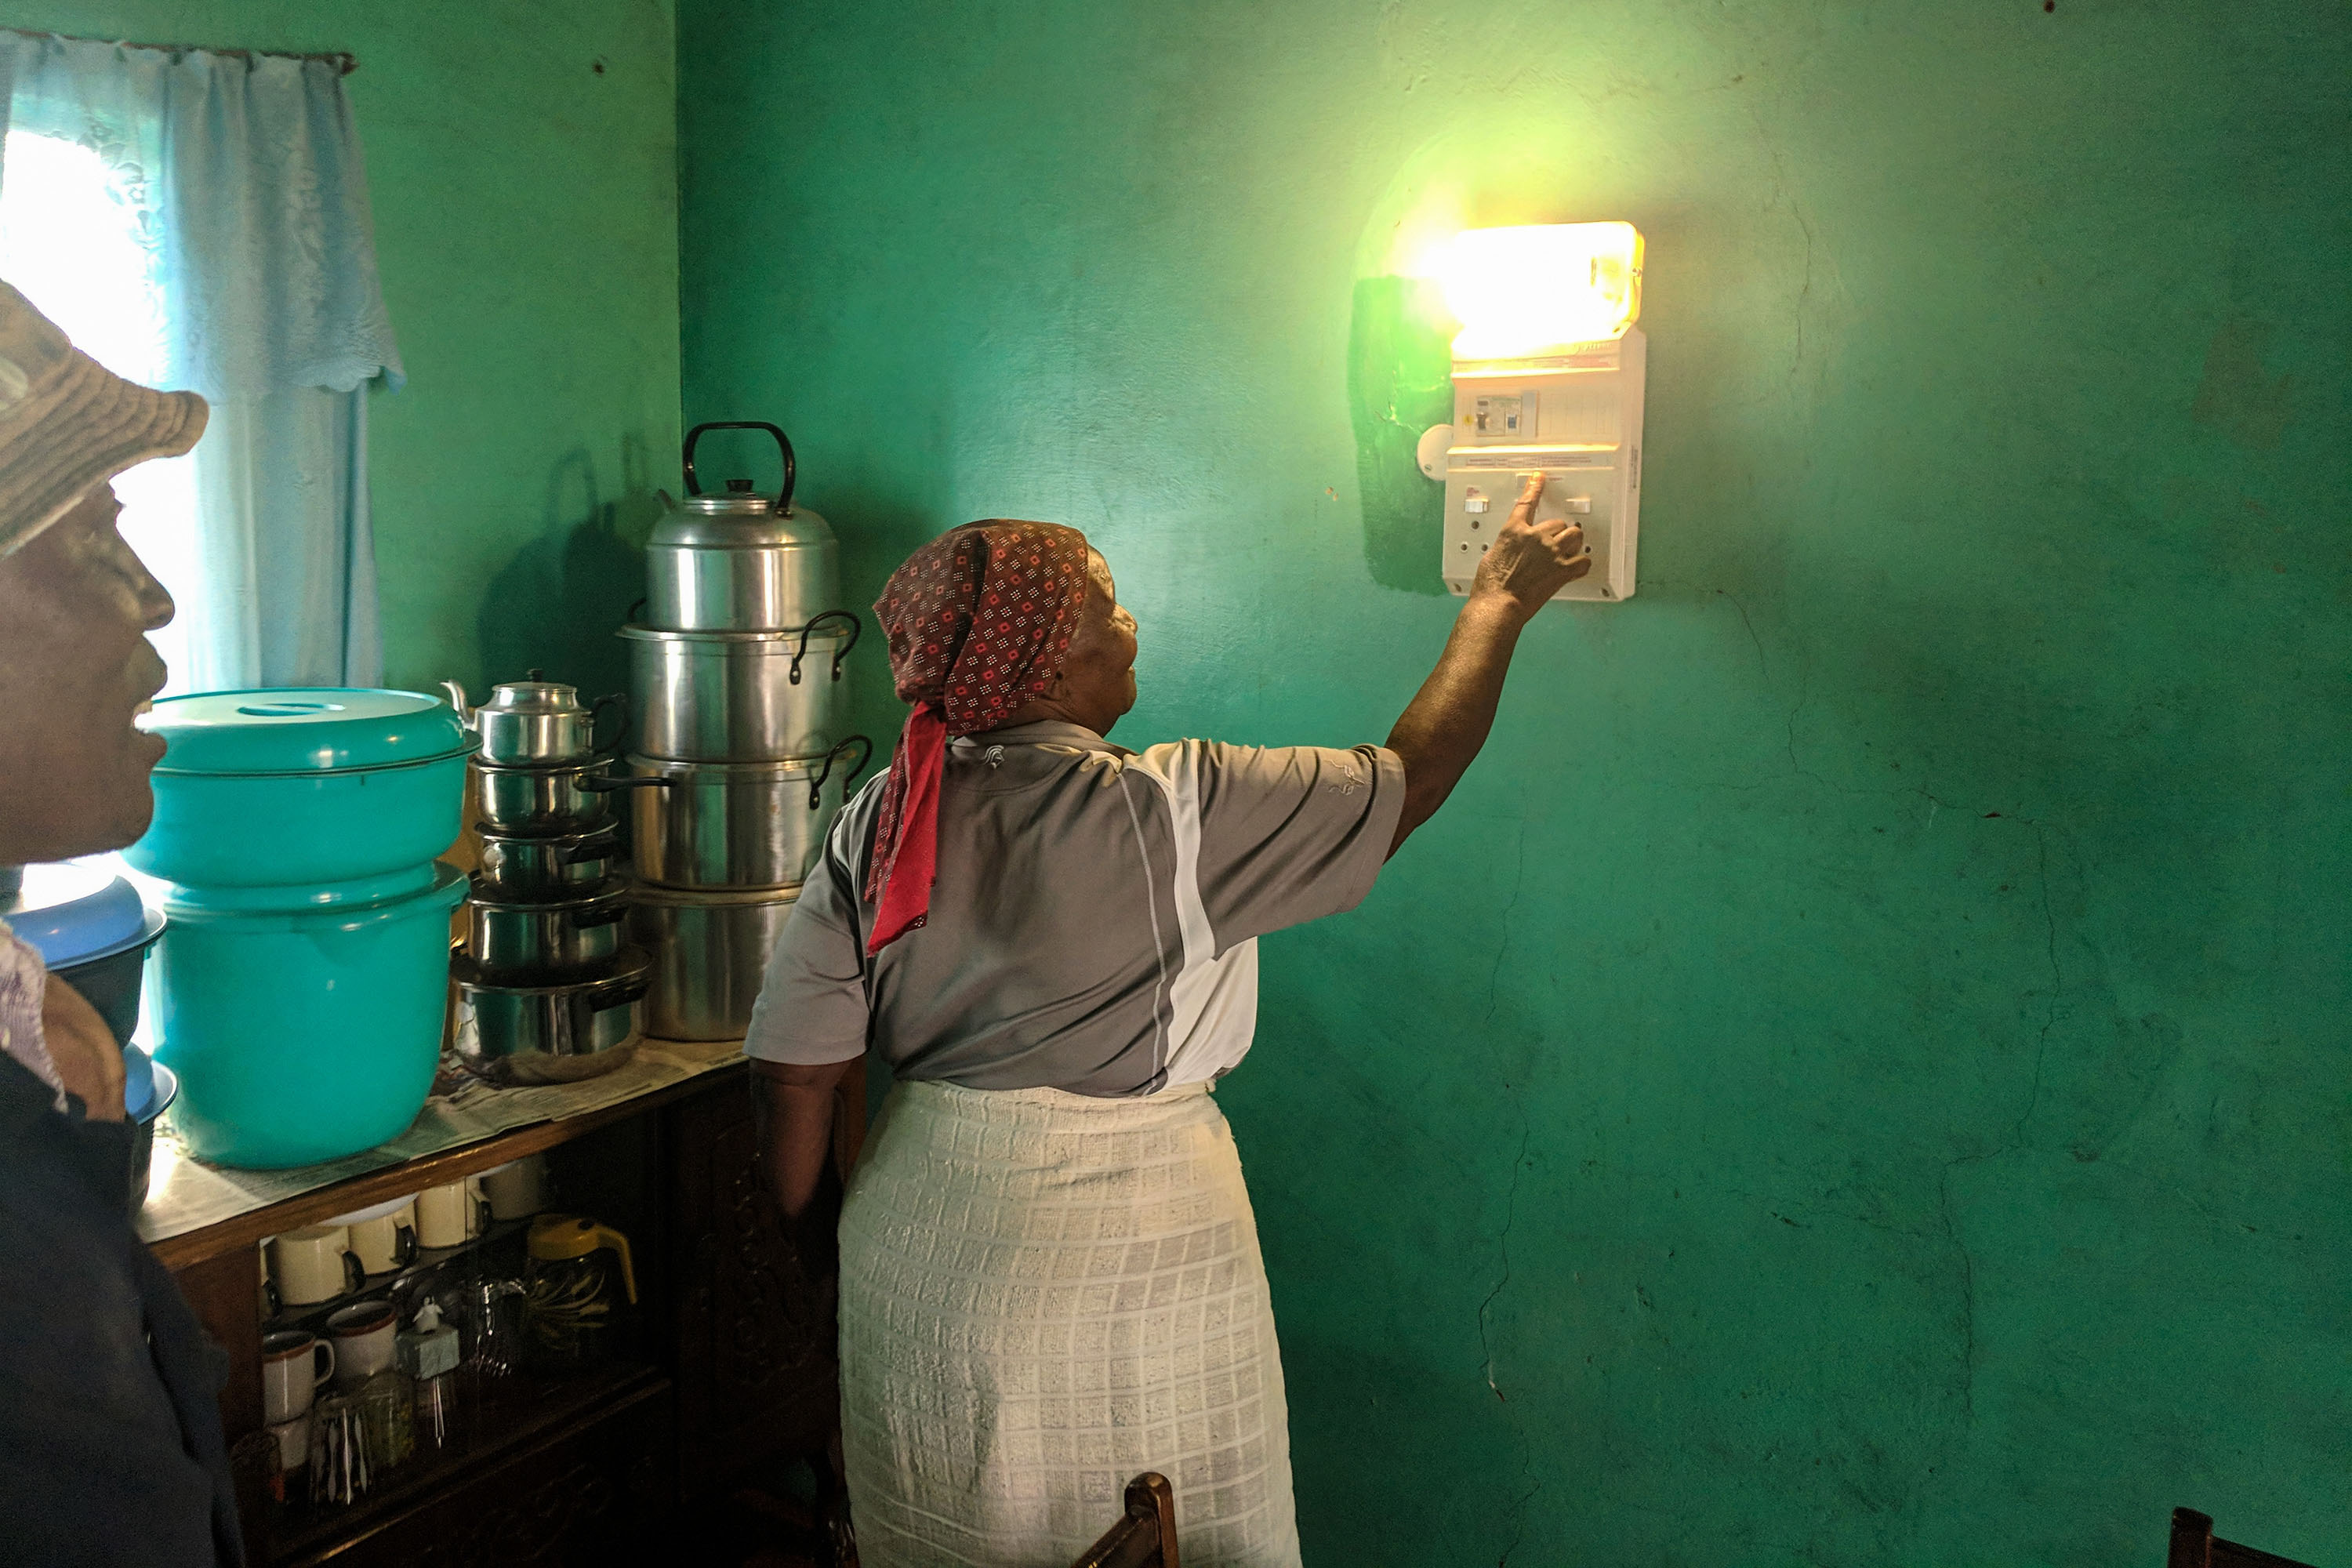 Woman presses wall device that lights up